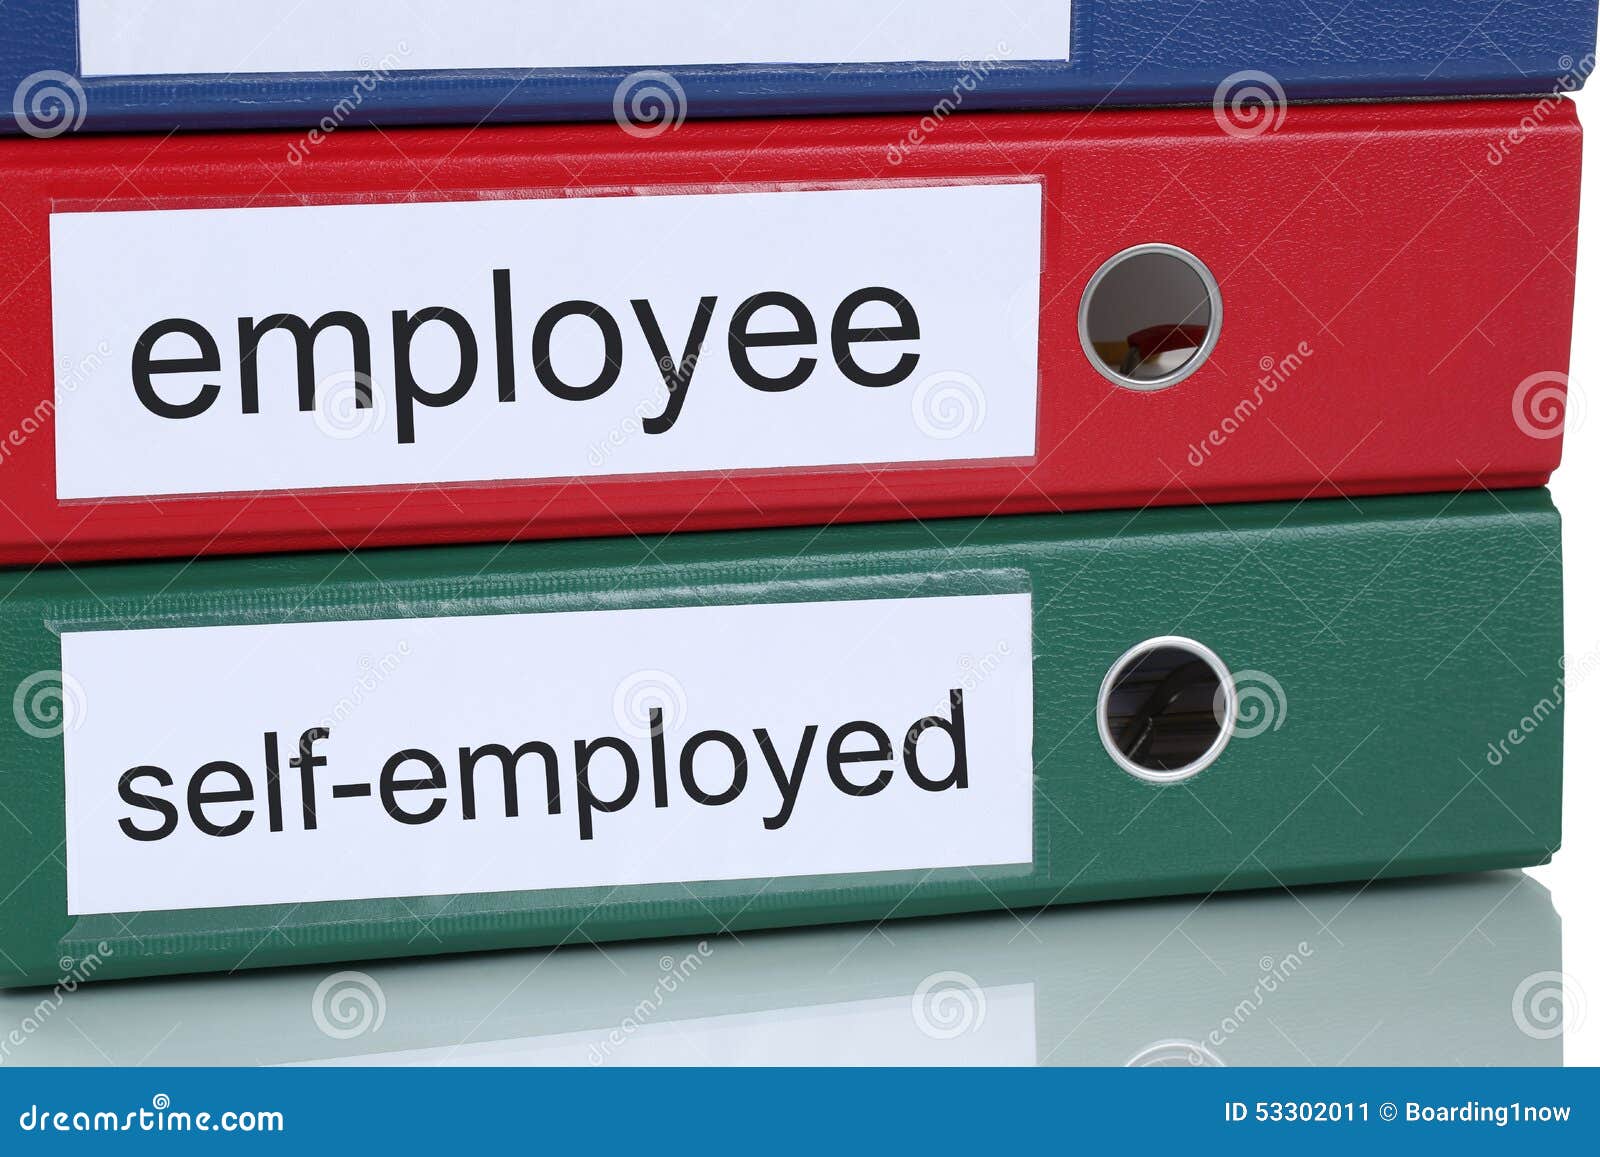 employee or self-employed business concept in office